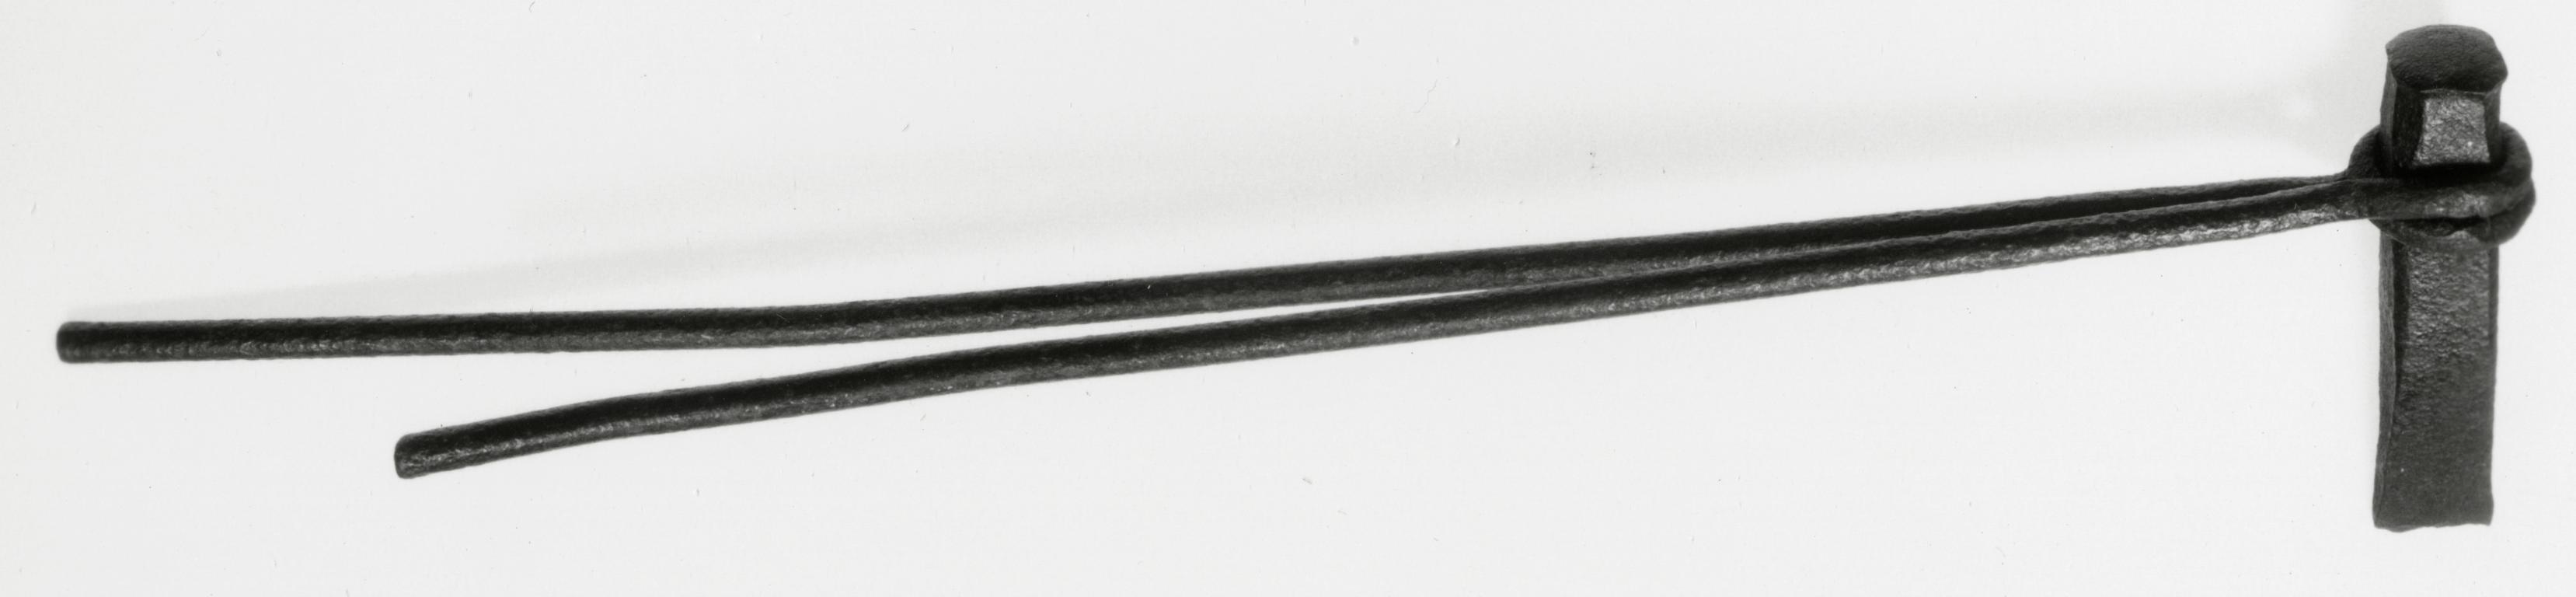 Black and white photograph of a blacksmith's chisel (hot set).